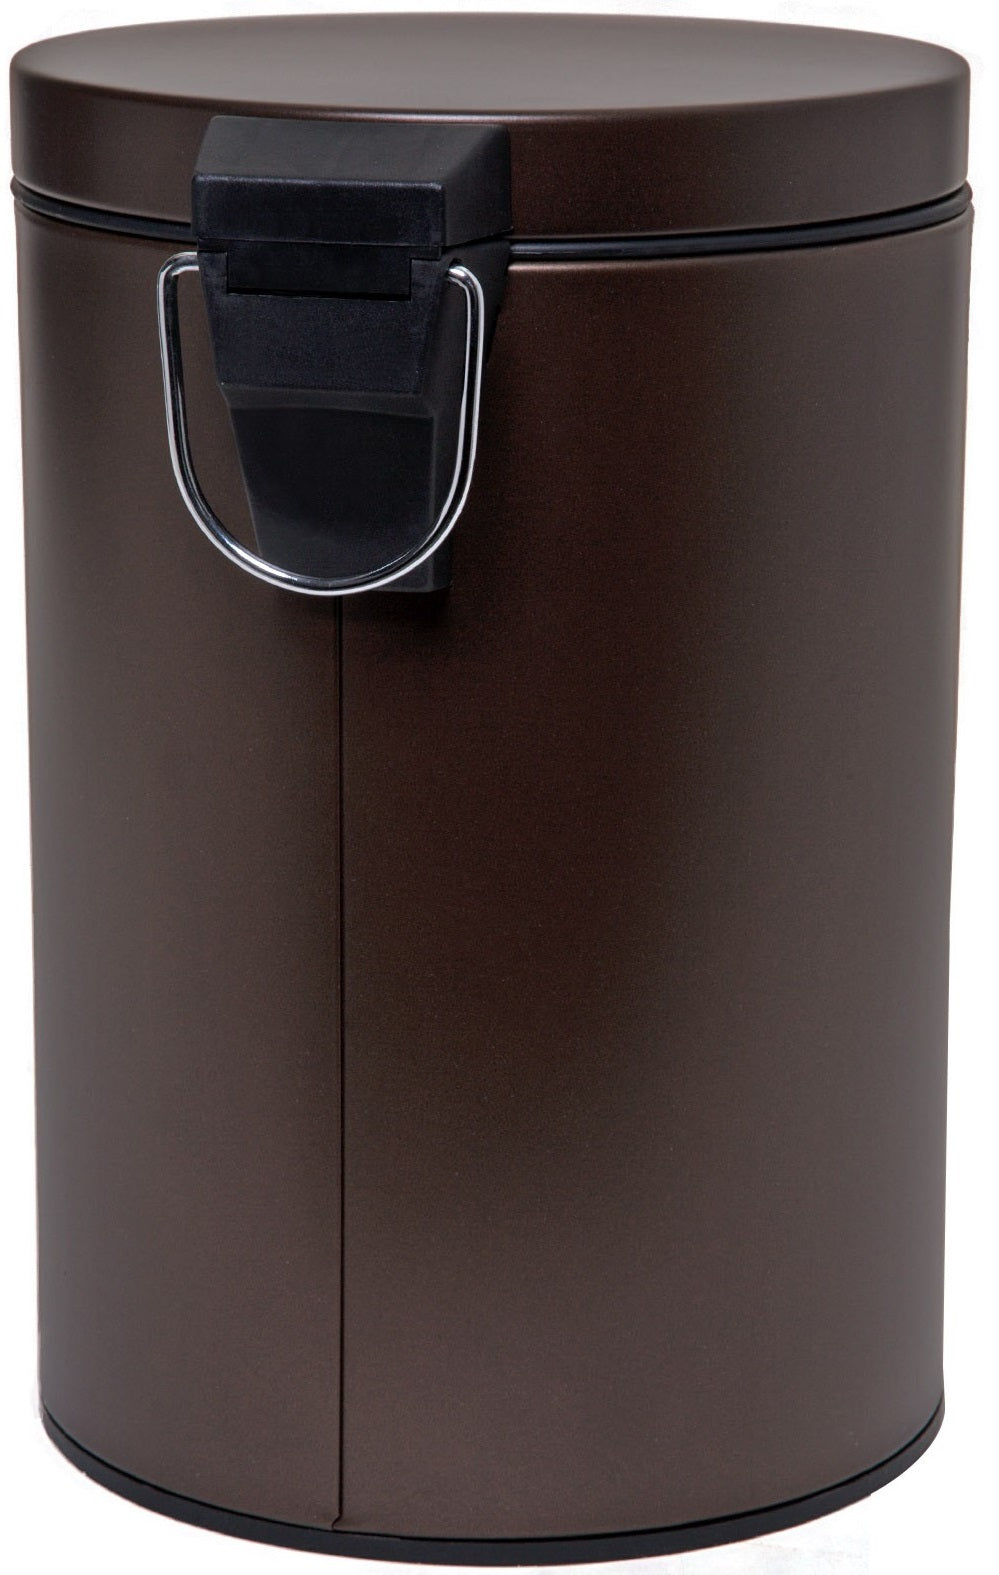 Simple Spaces LYP0701 Round Trash Can With Step Pedal, Venetian Bronze, 1.85 Gal